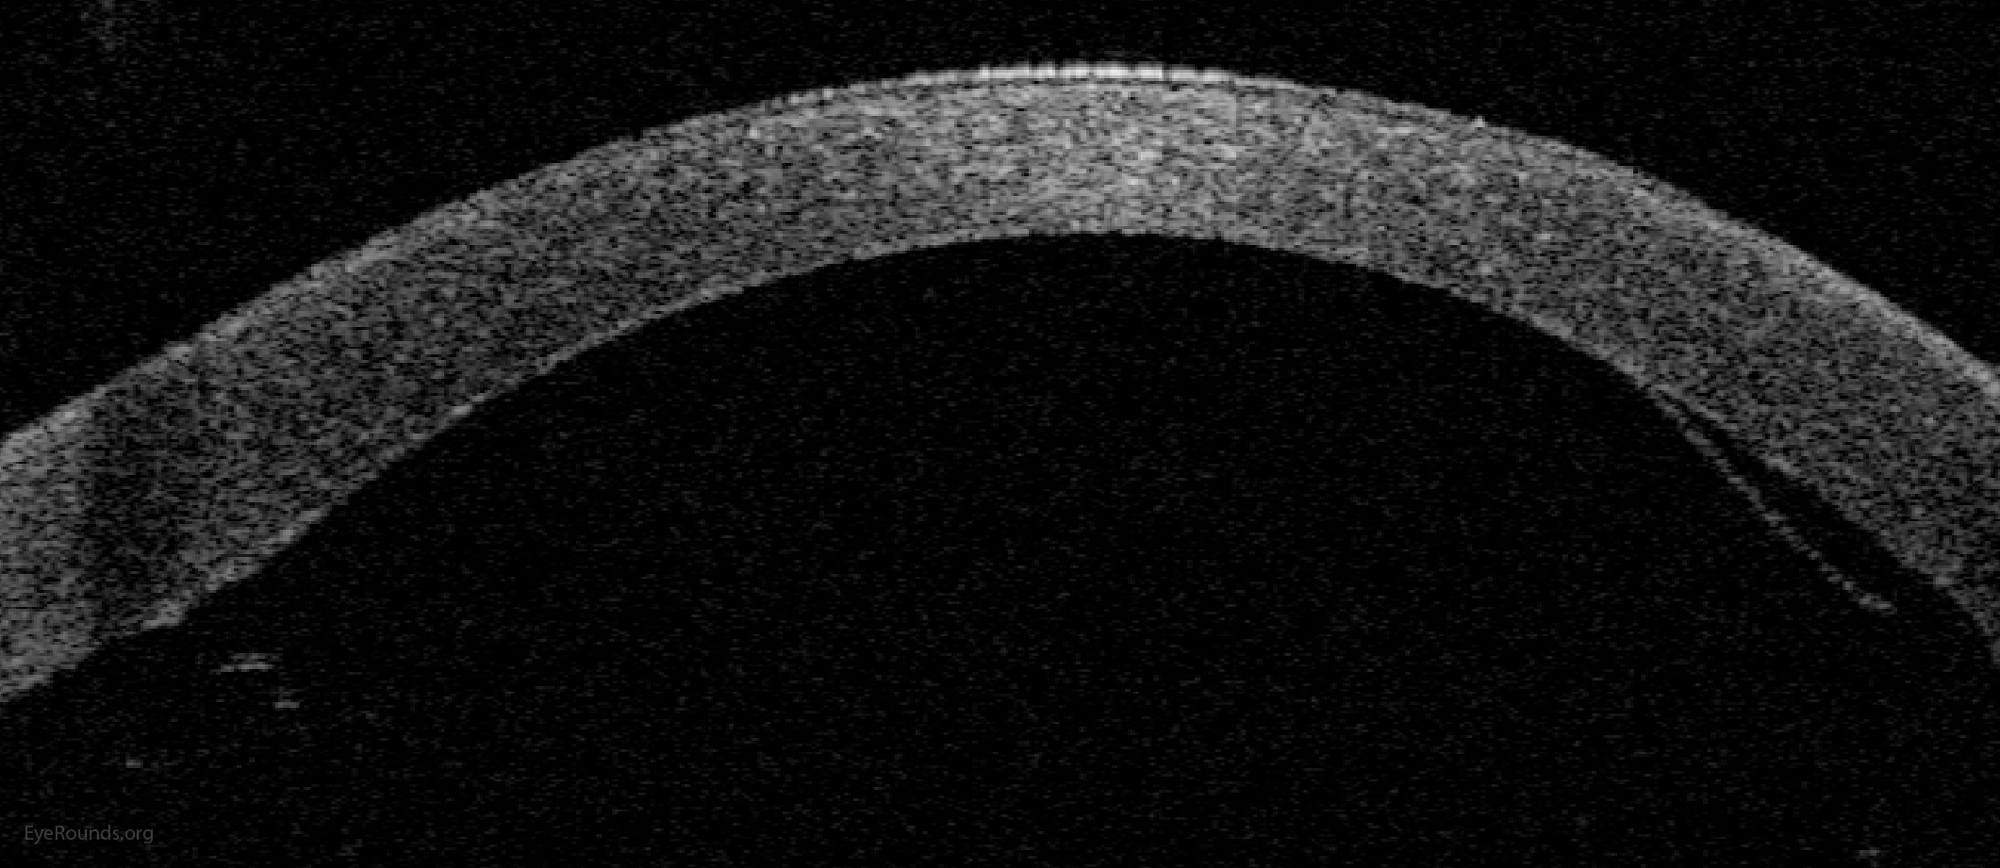  Anterior segment optical coherence tomography demonstrating a limited, peripheral graft edge lift